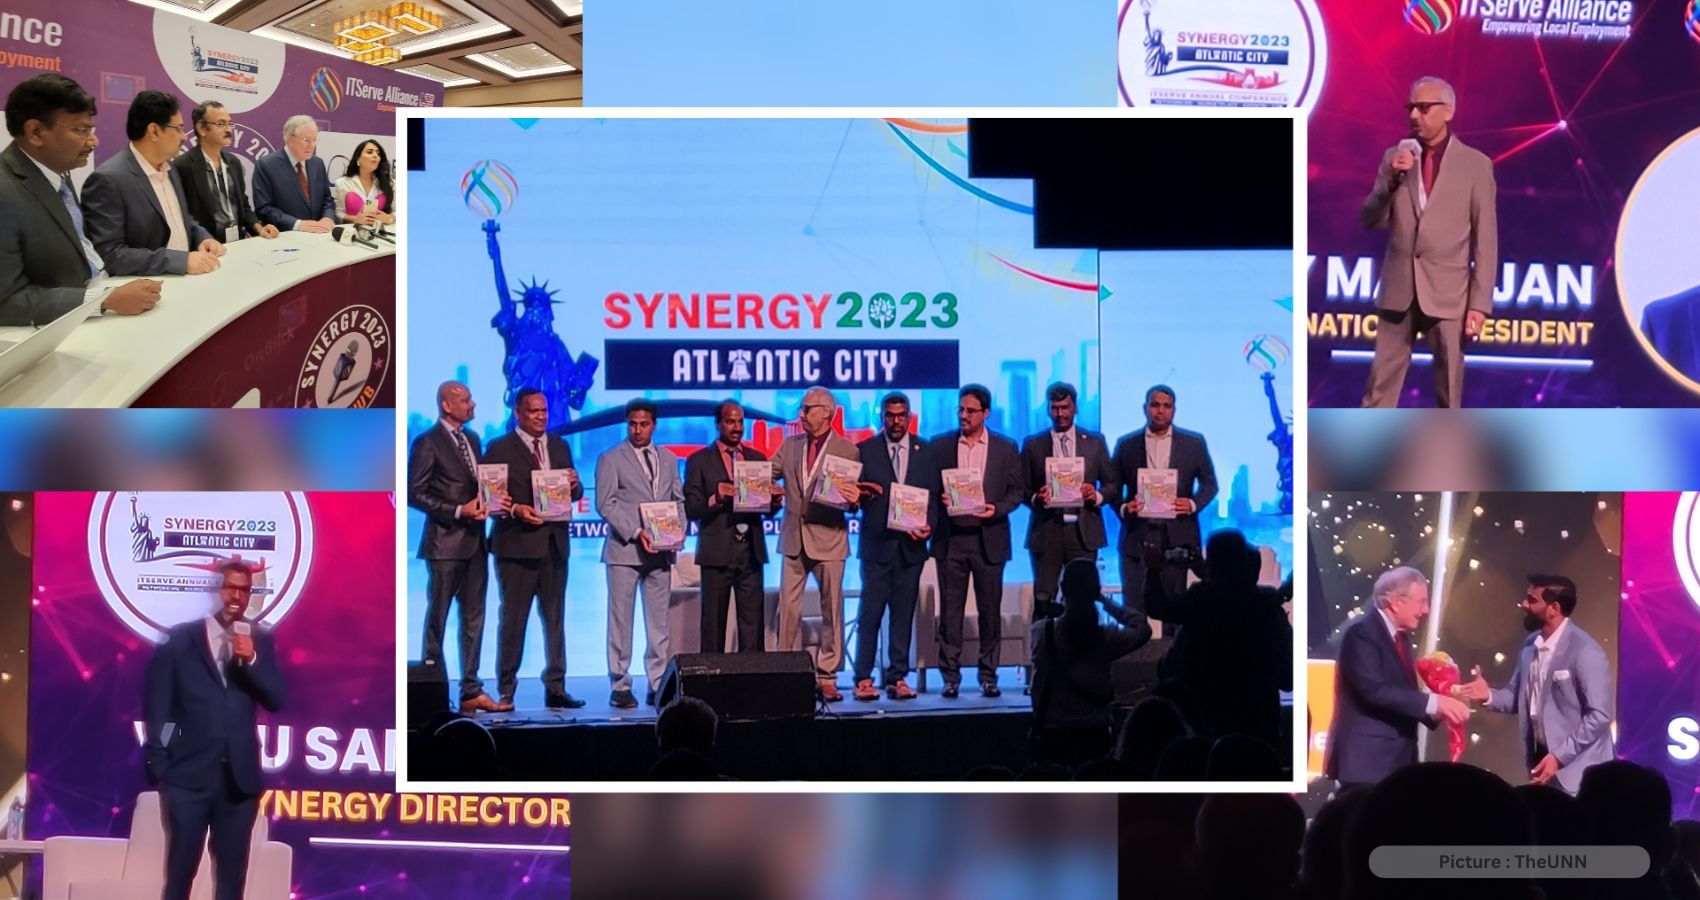 Synergy 2023 Begins in Atlantic City, Celebrating Remarkable Achievements of ITServe Members